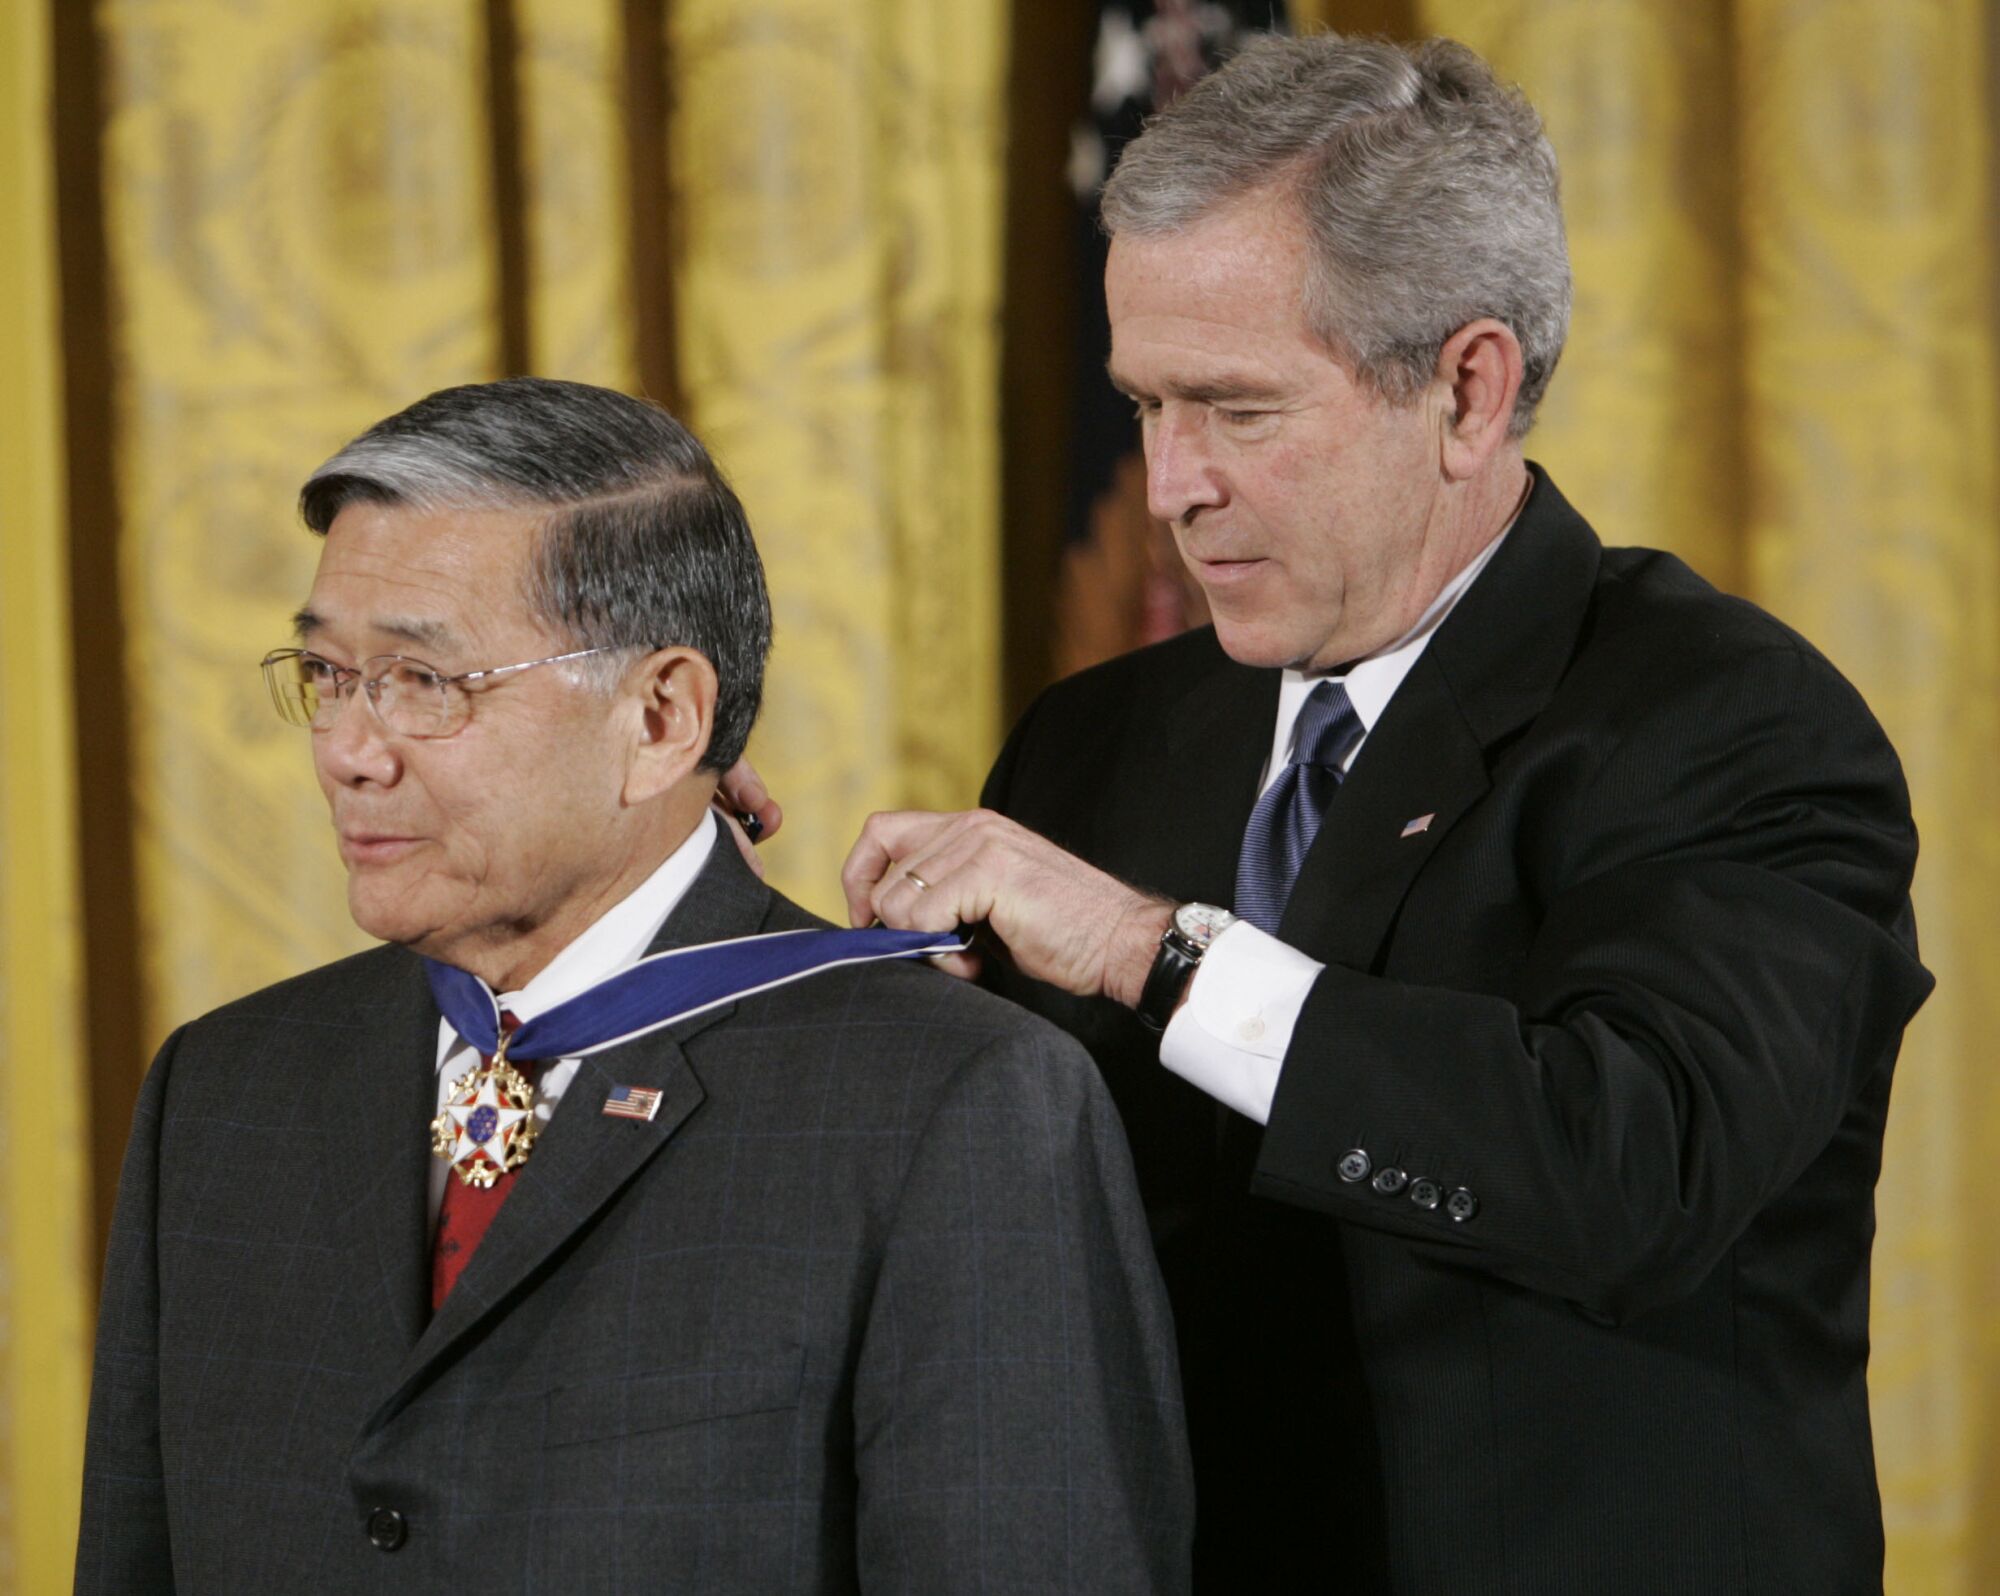 Then-President George W. Bush, right, bestows the Presidential Medal of Freedom to Norman Mineta.